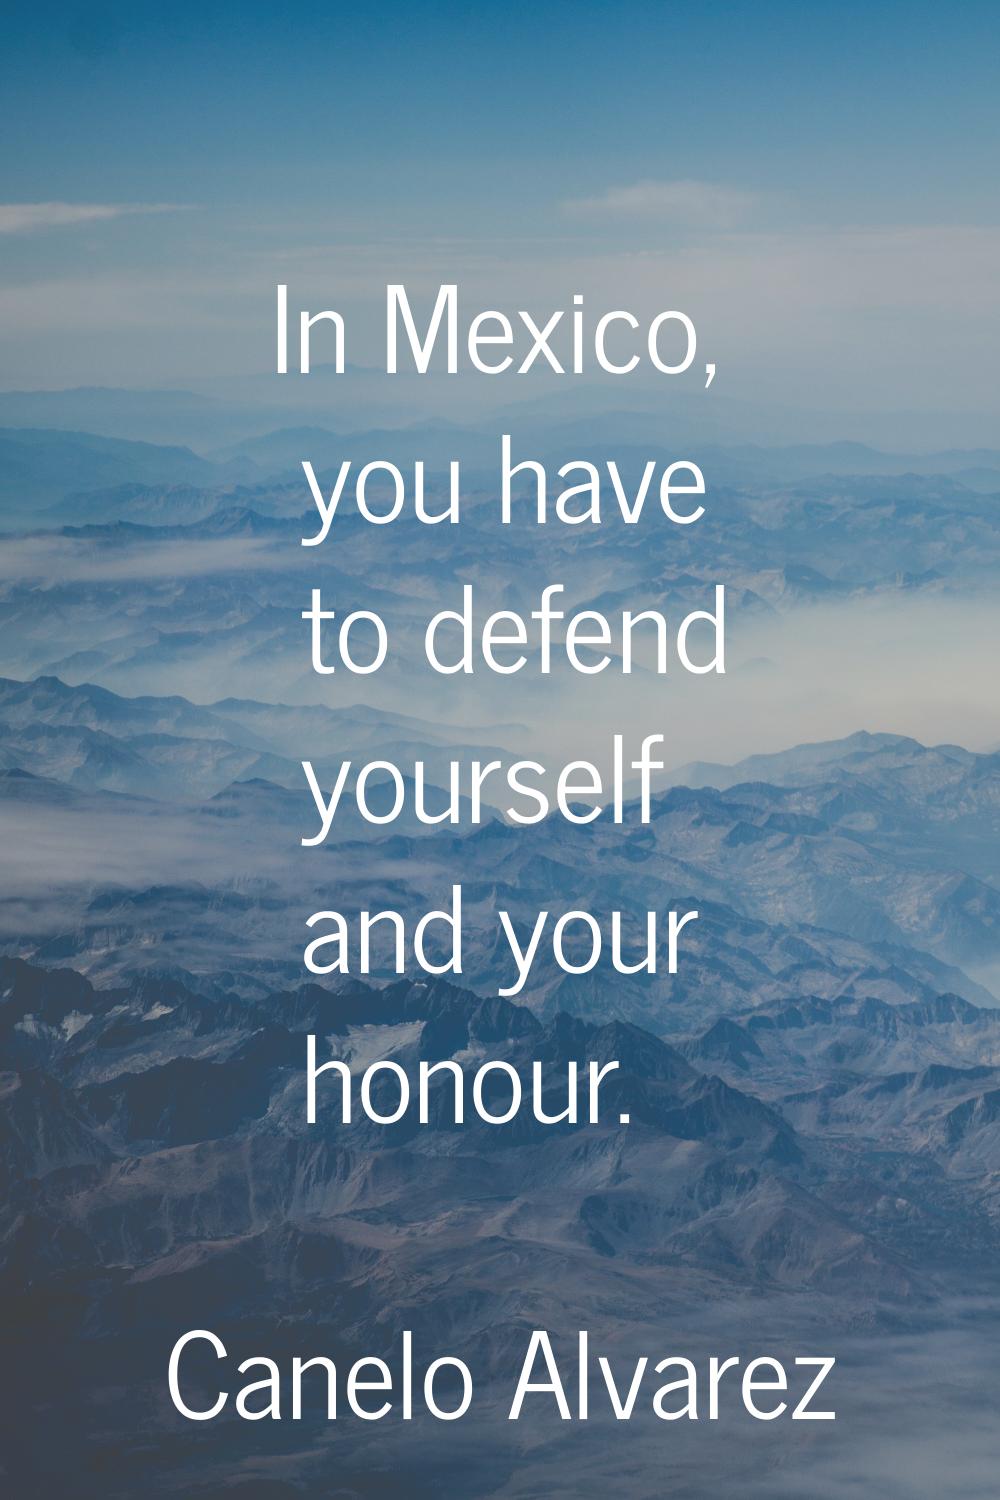 In Mexico, you have to defend yourself and your honour.